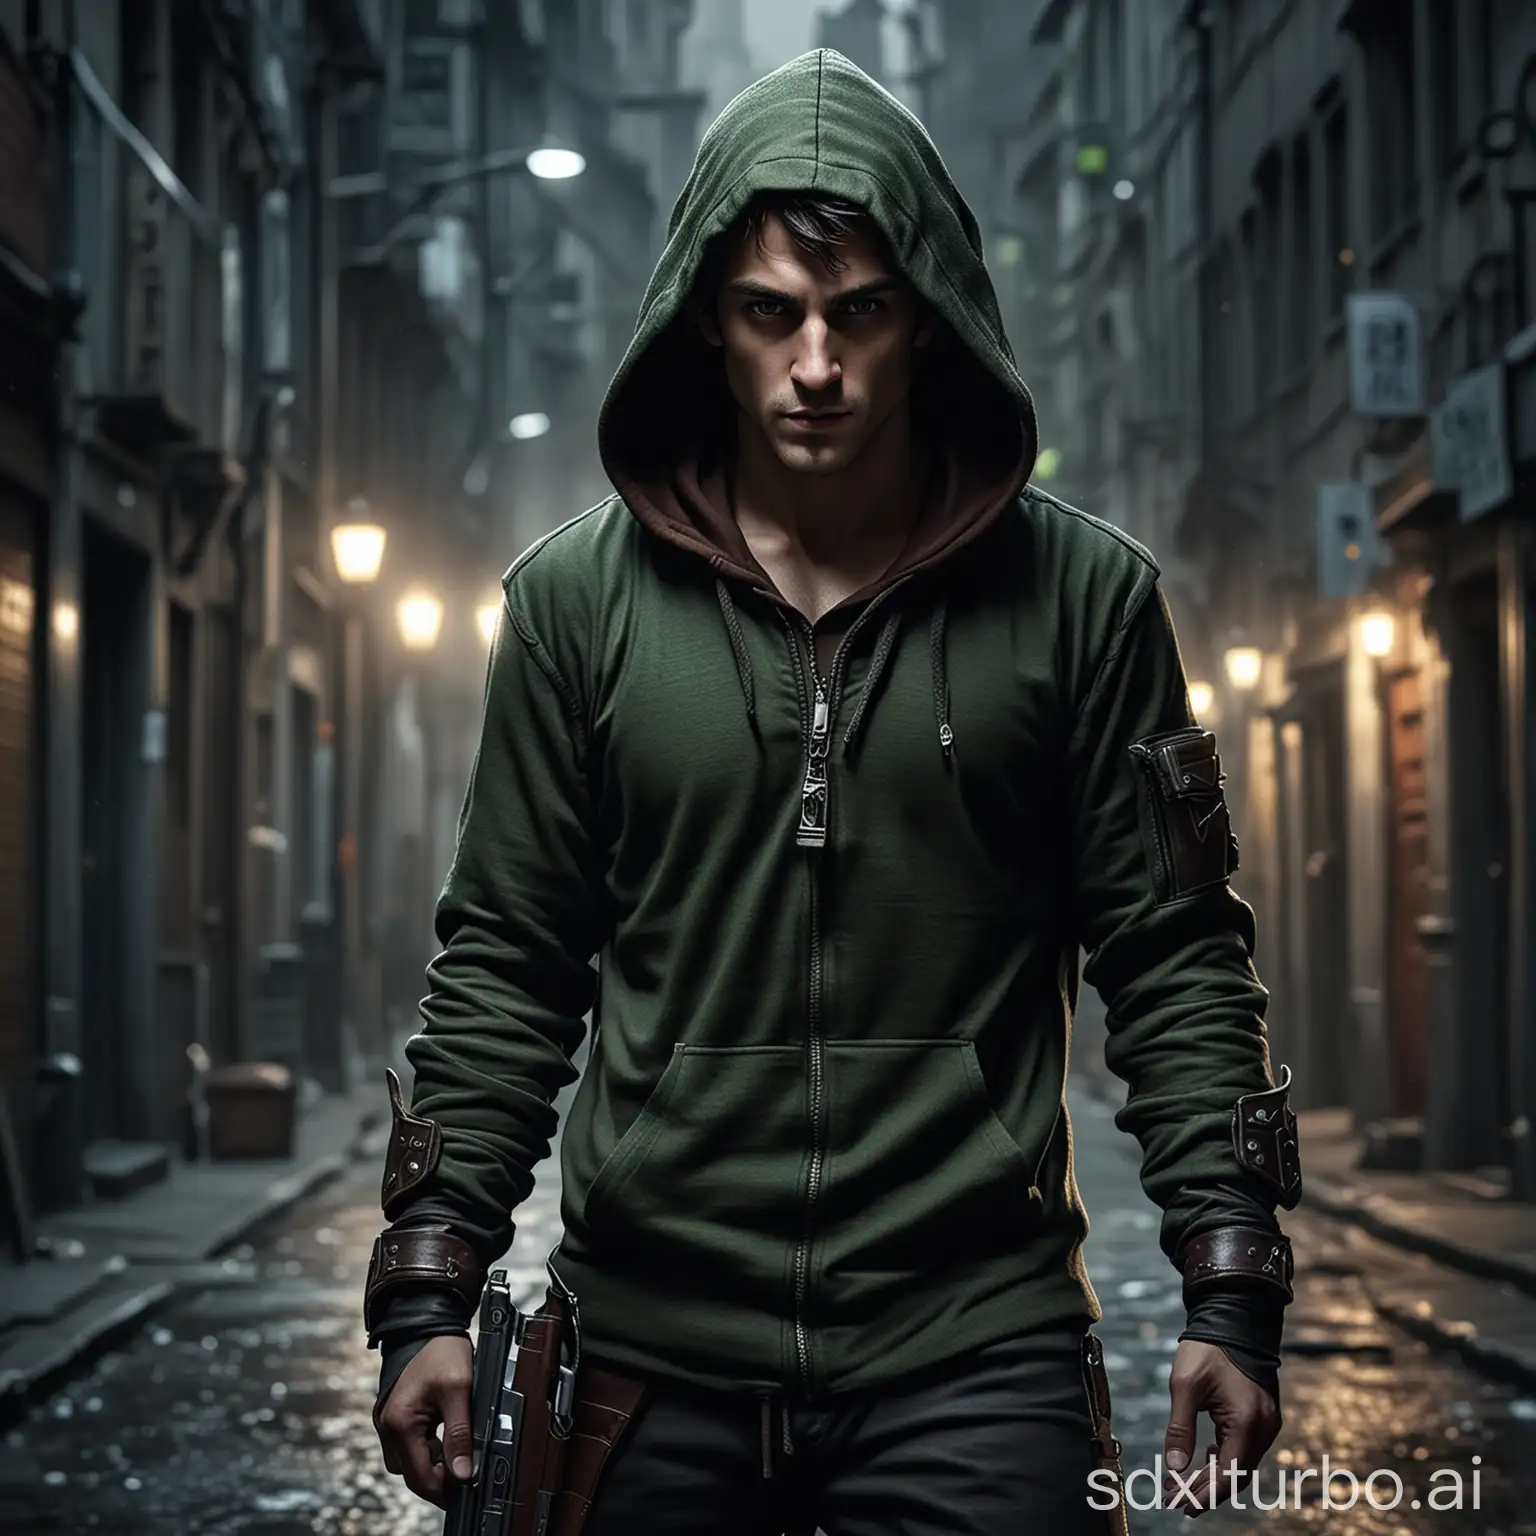 Create a high resolution, 16:9 aspect ratio, image about "A Shadworun legende". Show a male elf in a Hoody and a modern pistole in his hand, alone in a dark street of modern city

